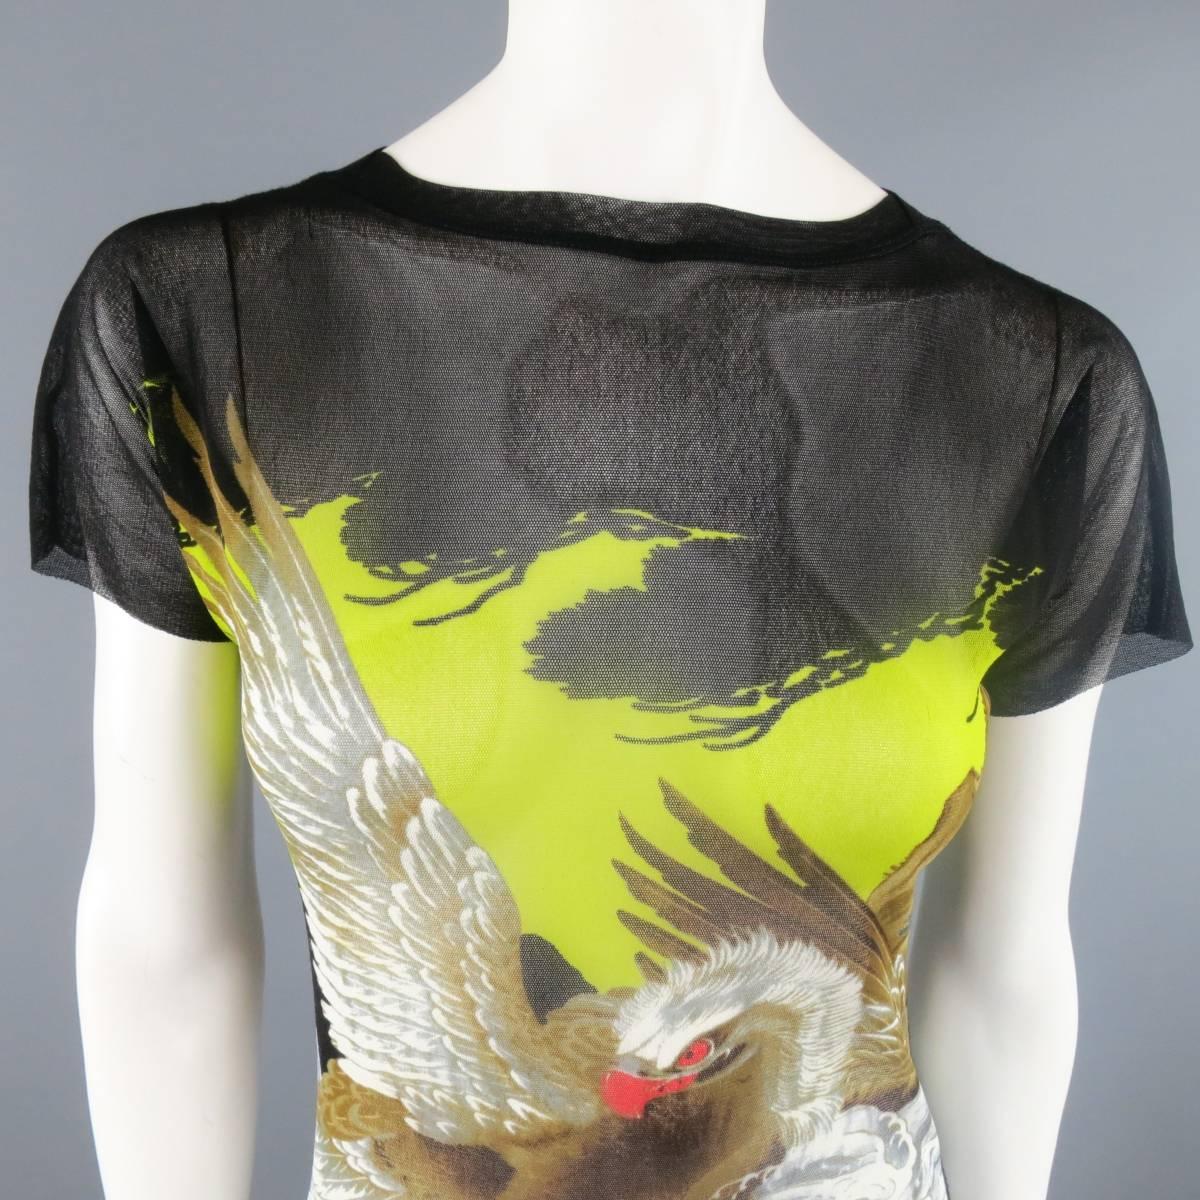 Vintage JEAN PAUL GAULTIER polyamide see-through mesh t-shirt features a generous stretch around the body, black and green multi-colored Japanese eagle on waves air brush design, and aw edging on sleeves with exposed seams on the sides and bottom